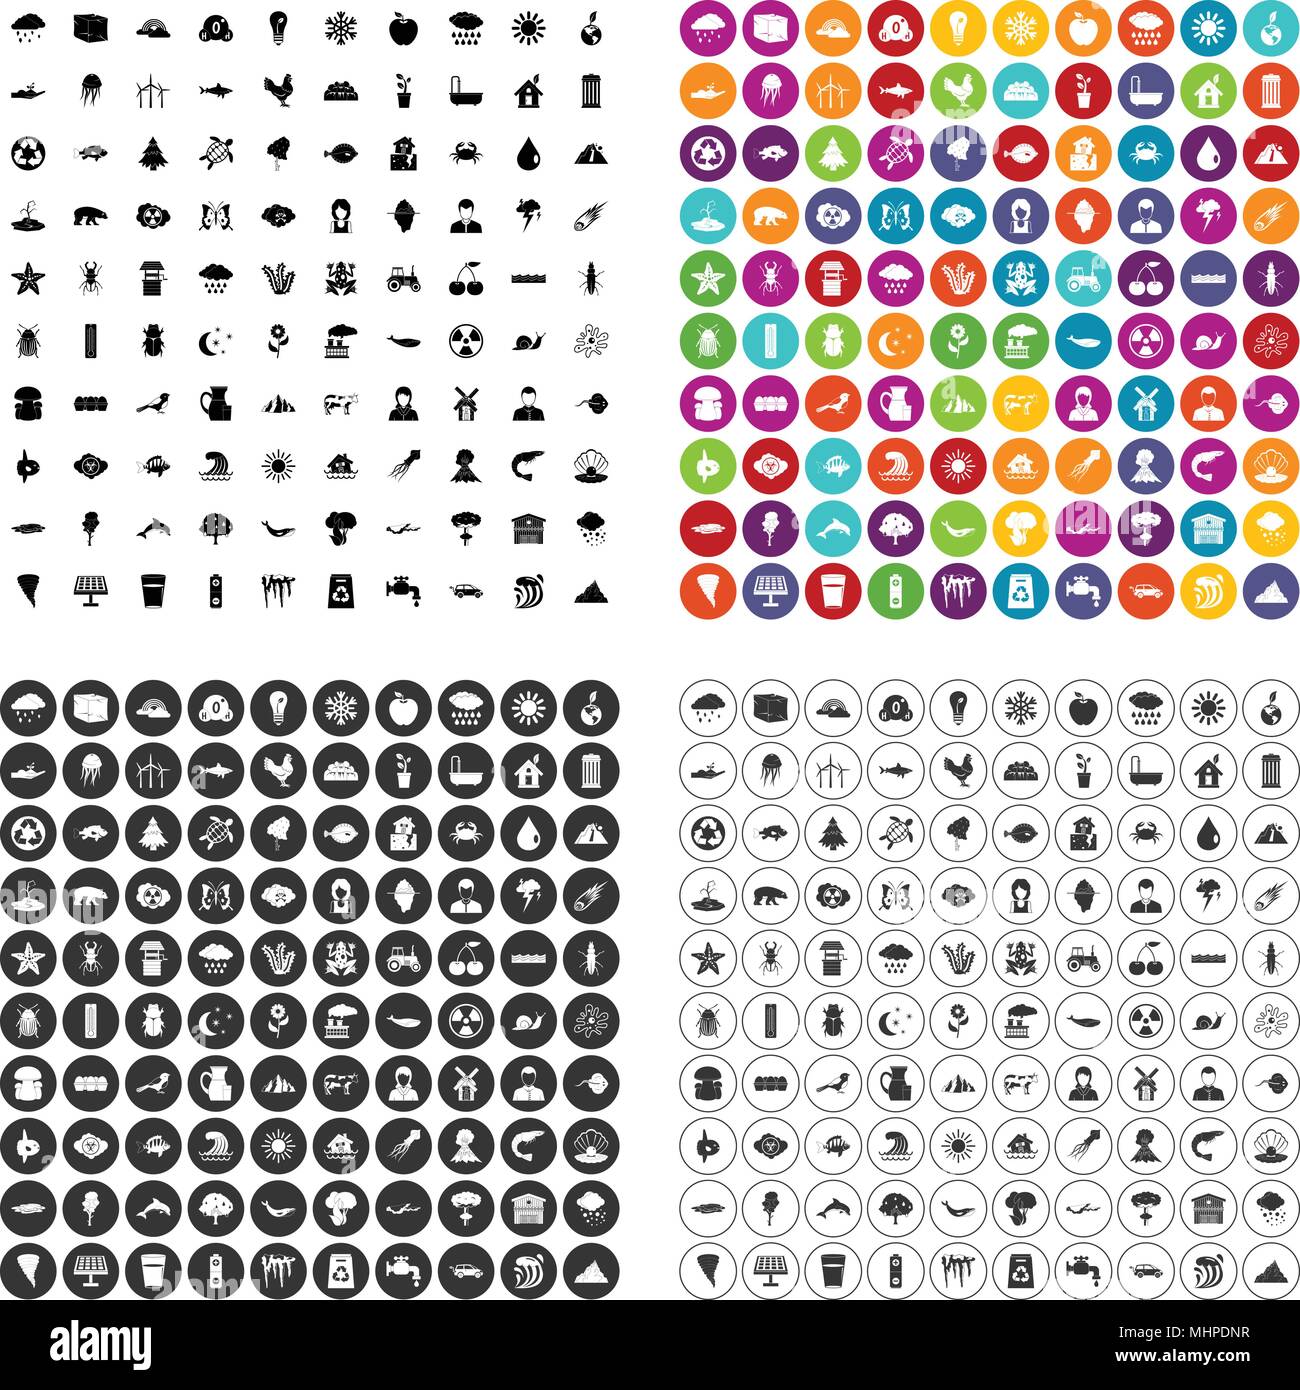 100 earth icons set vector variant Stock Vector